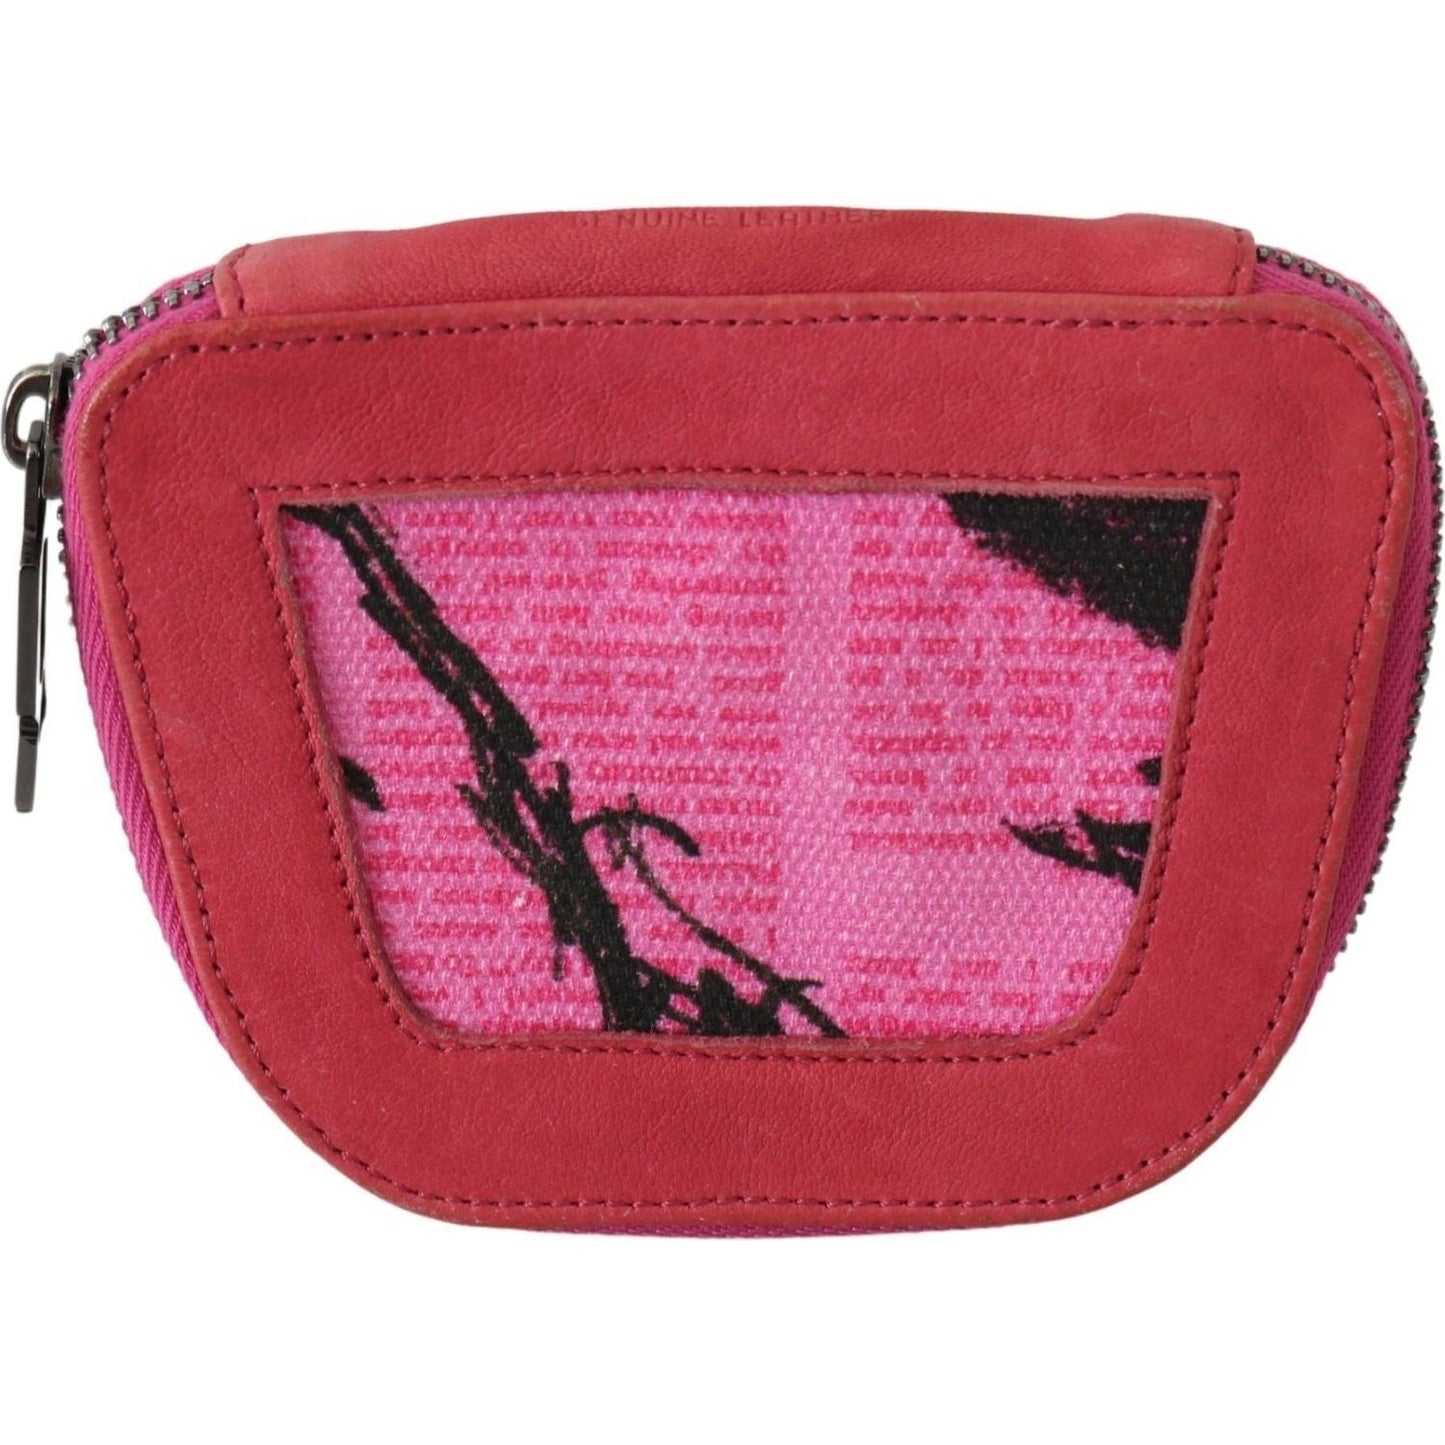 PINKO Elegant Pink Fabric Coin Wallet Purse pink-suede-printed-coin-holder-women-fabric-zippered-purse IMG_0181-636db08a-11d.jpg